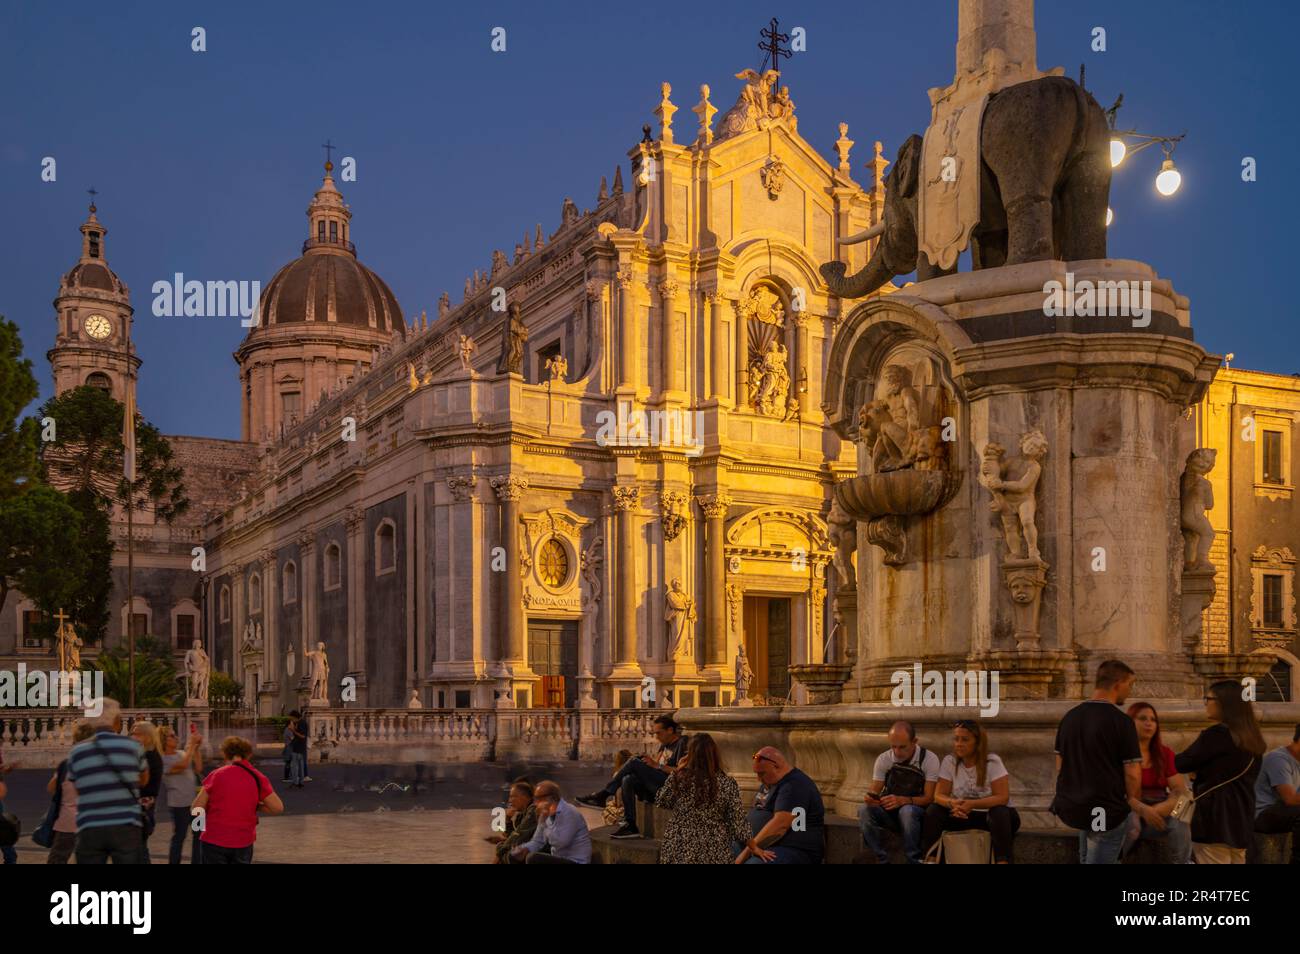 View of Duomo di Sant'Agata and Fountain of Elephants in Piazza Duomo at dusk, Catania, Sicily, Italy, Europe Stock Photo